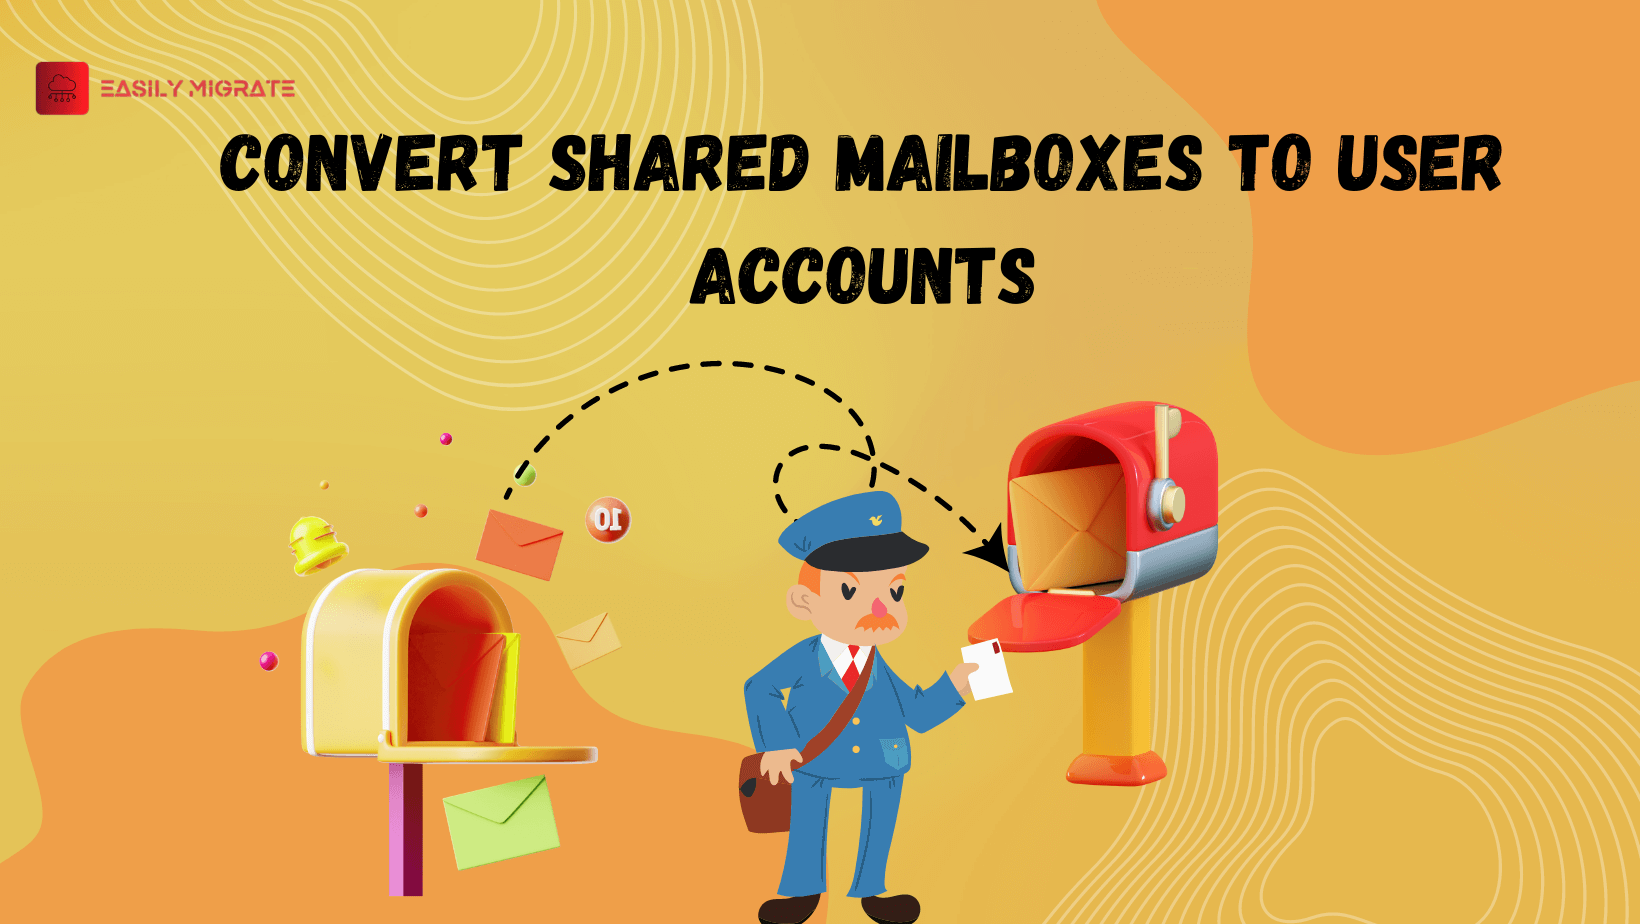 Process to Convert Shared Mailboxes to User Accounts